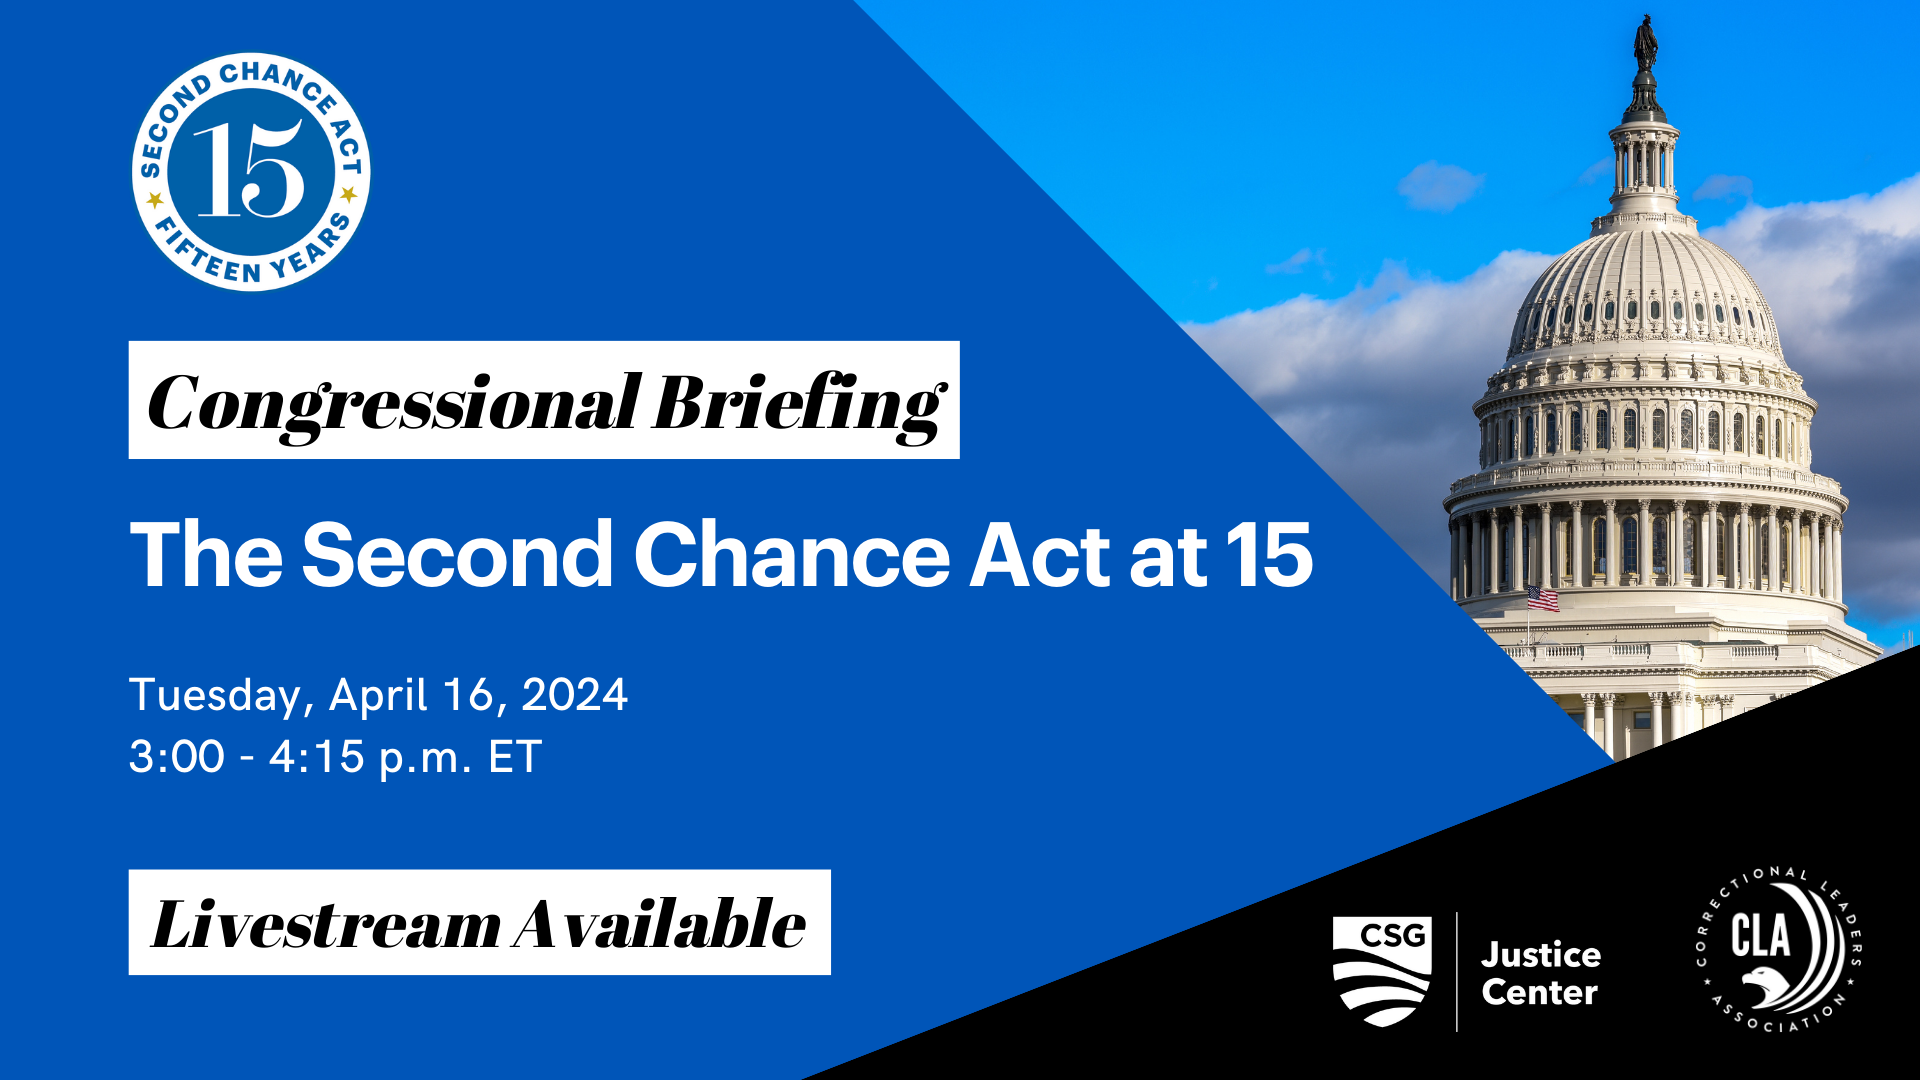 Congressional Briefing: The Second Chance Act at 15